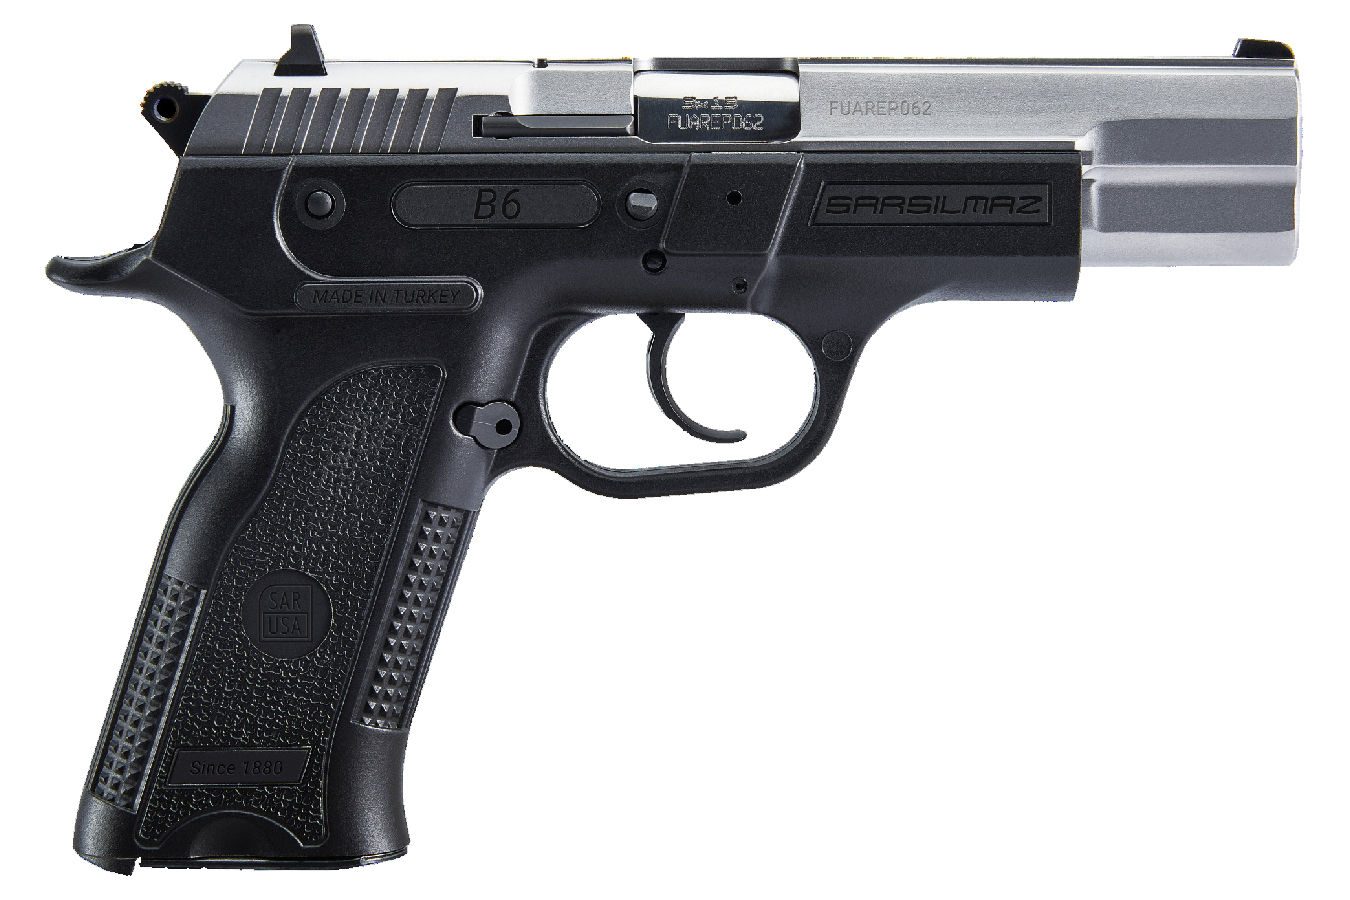 B6 9MM PISTOL WITH STAINLESS SLIDE